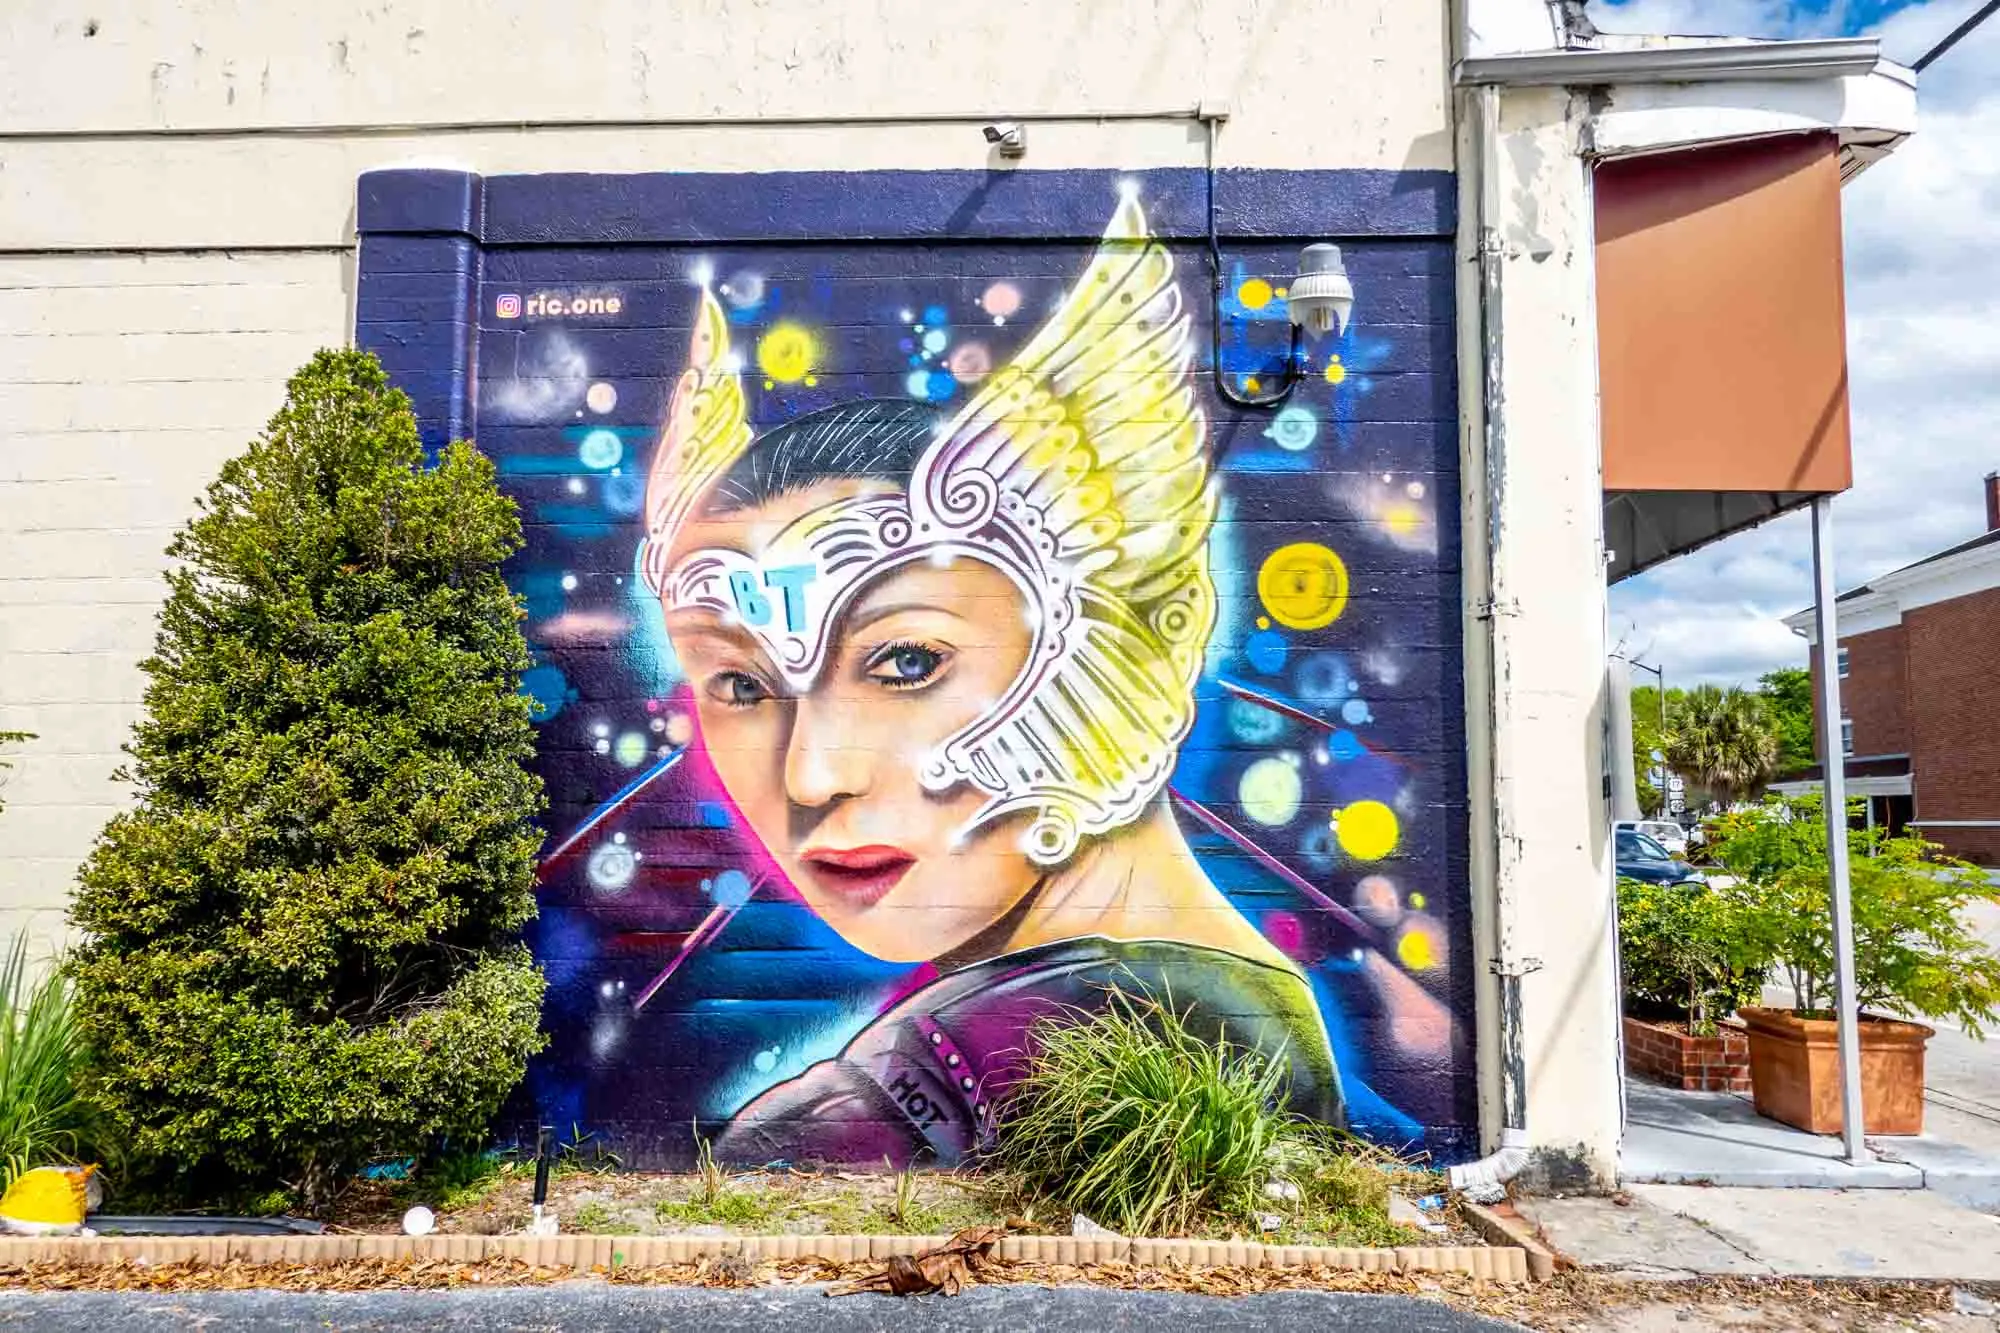 Street art mural of a woman wearing a purple costume and a headpiece with gold wings.